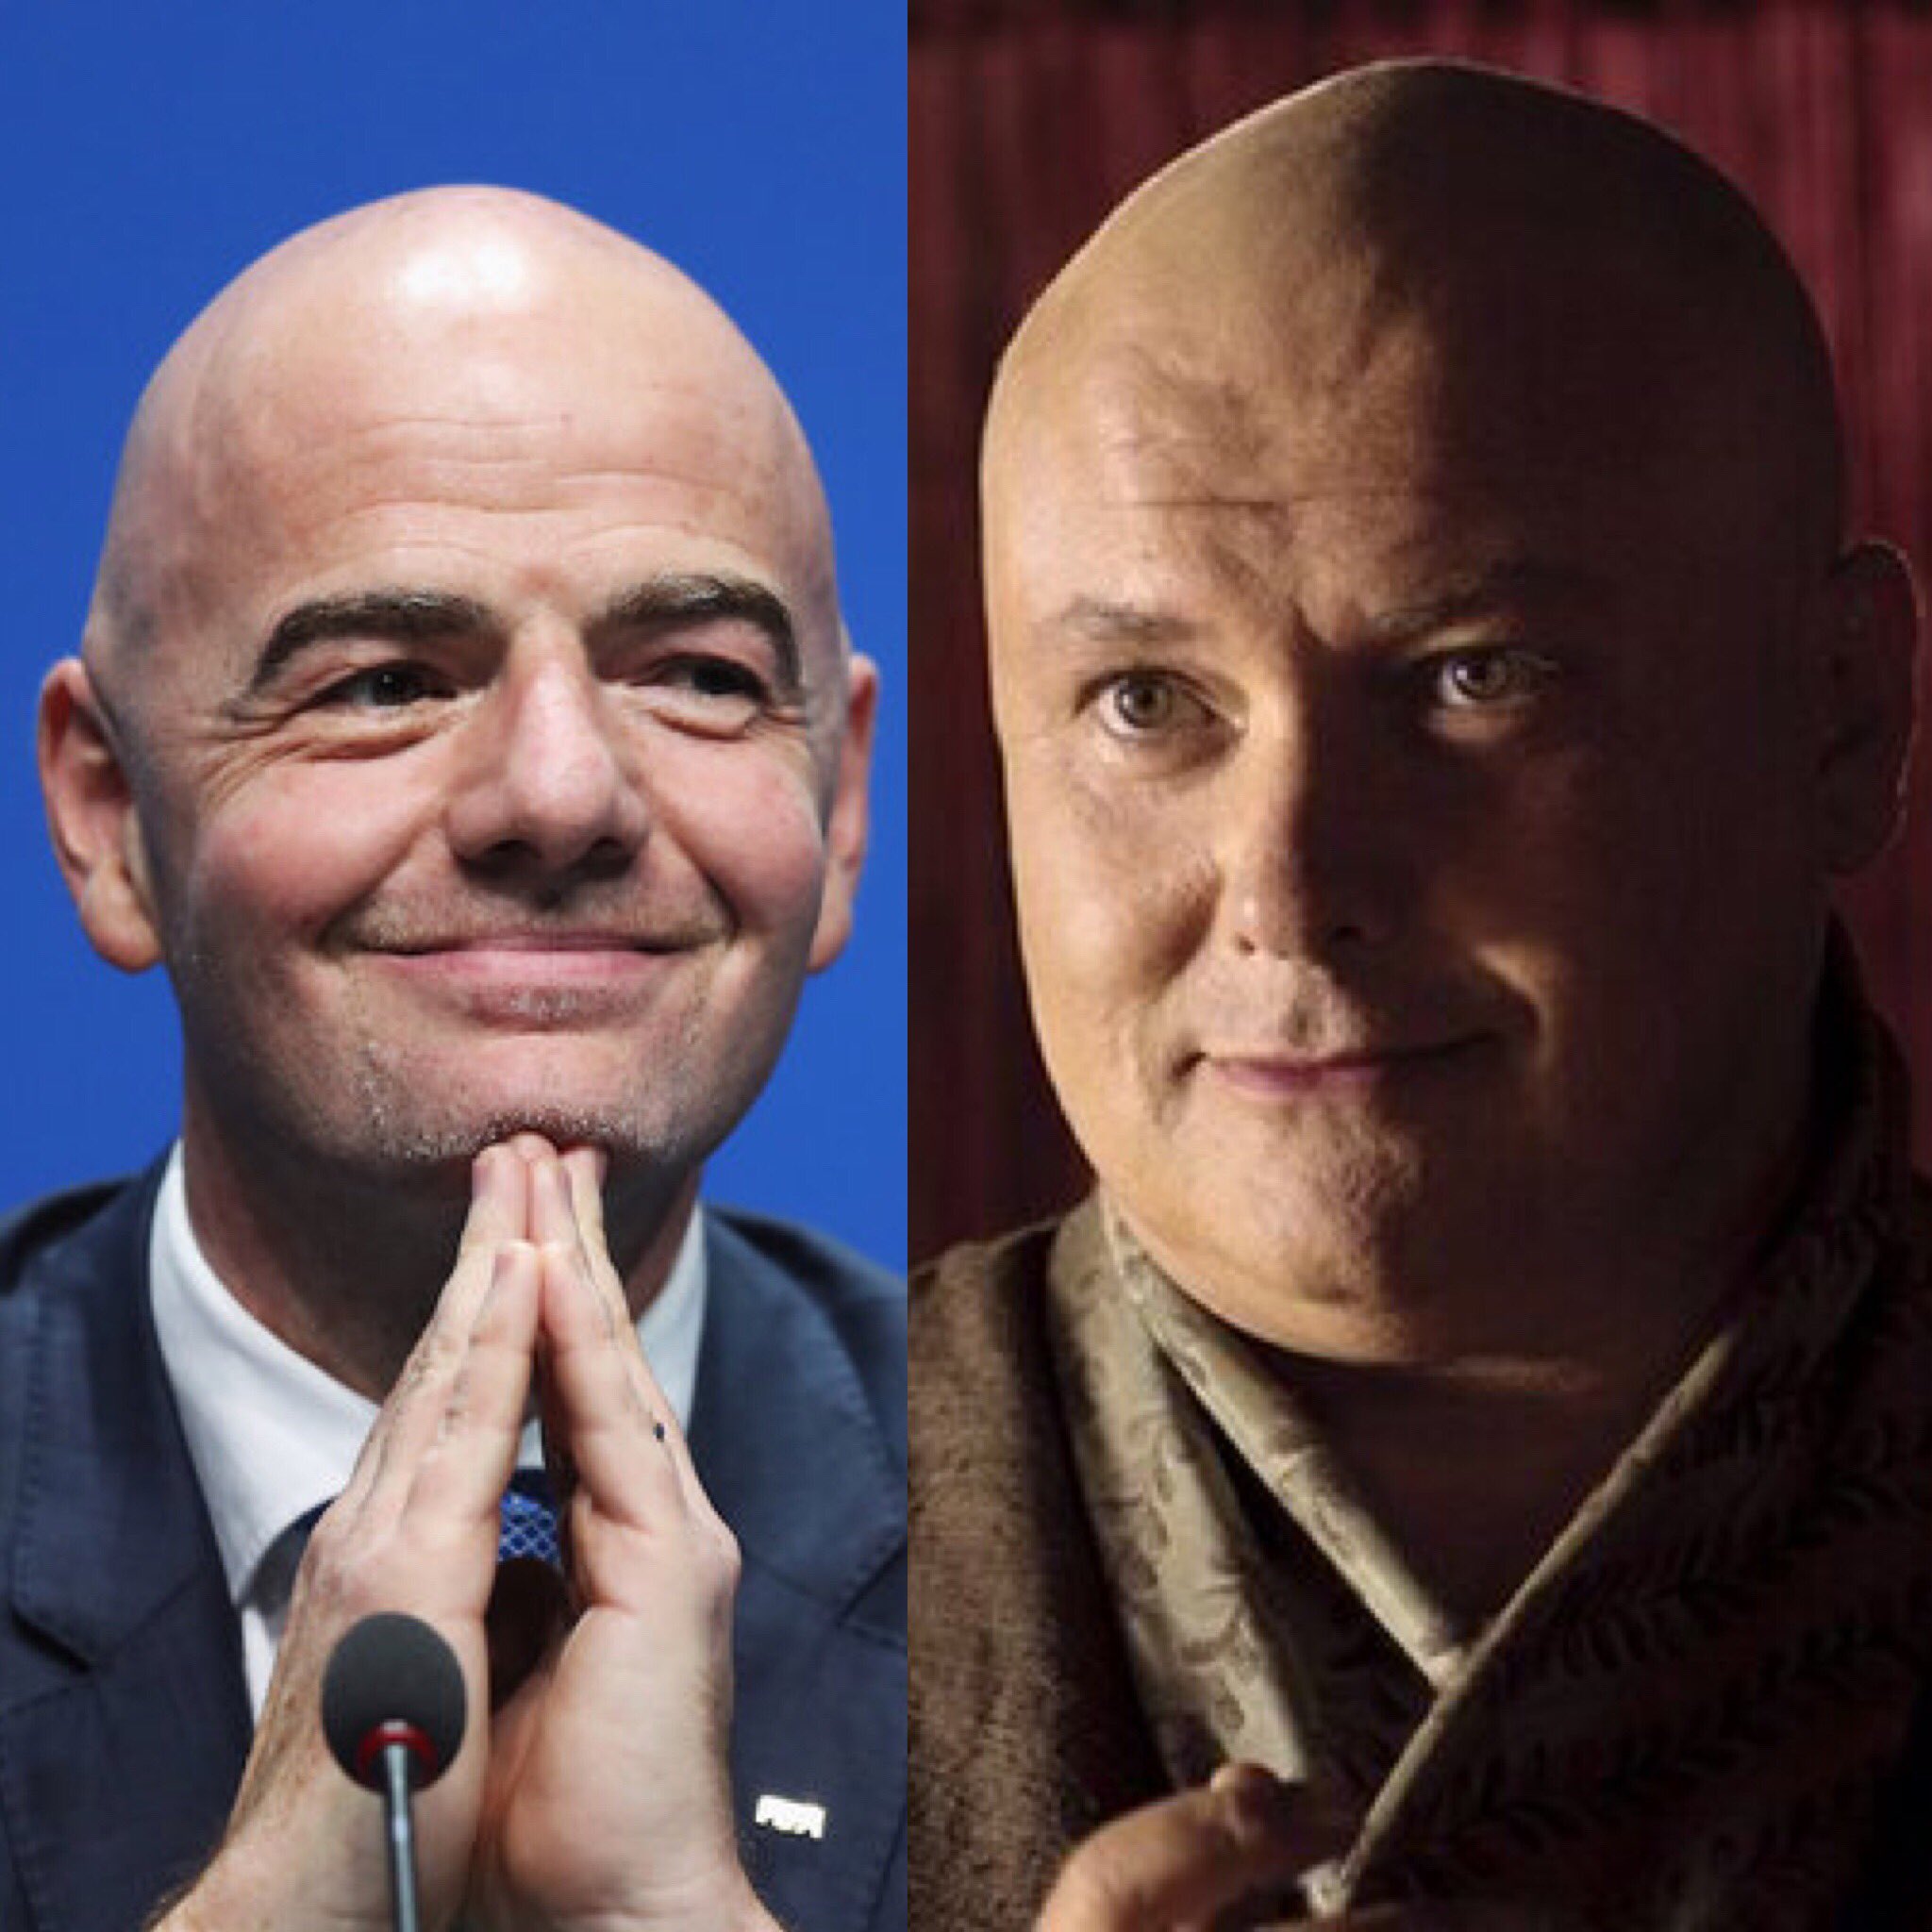 Musa Okwonga on Twitter: "There is of course no way in which the  masterfully scheming Gianni Infantino, whose greatest loyalty is to FIFA's  realm, resembles Lord Varys. So I won't make the